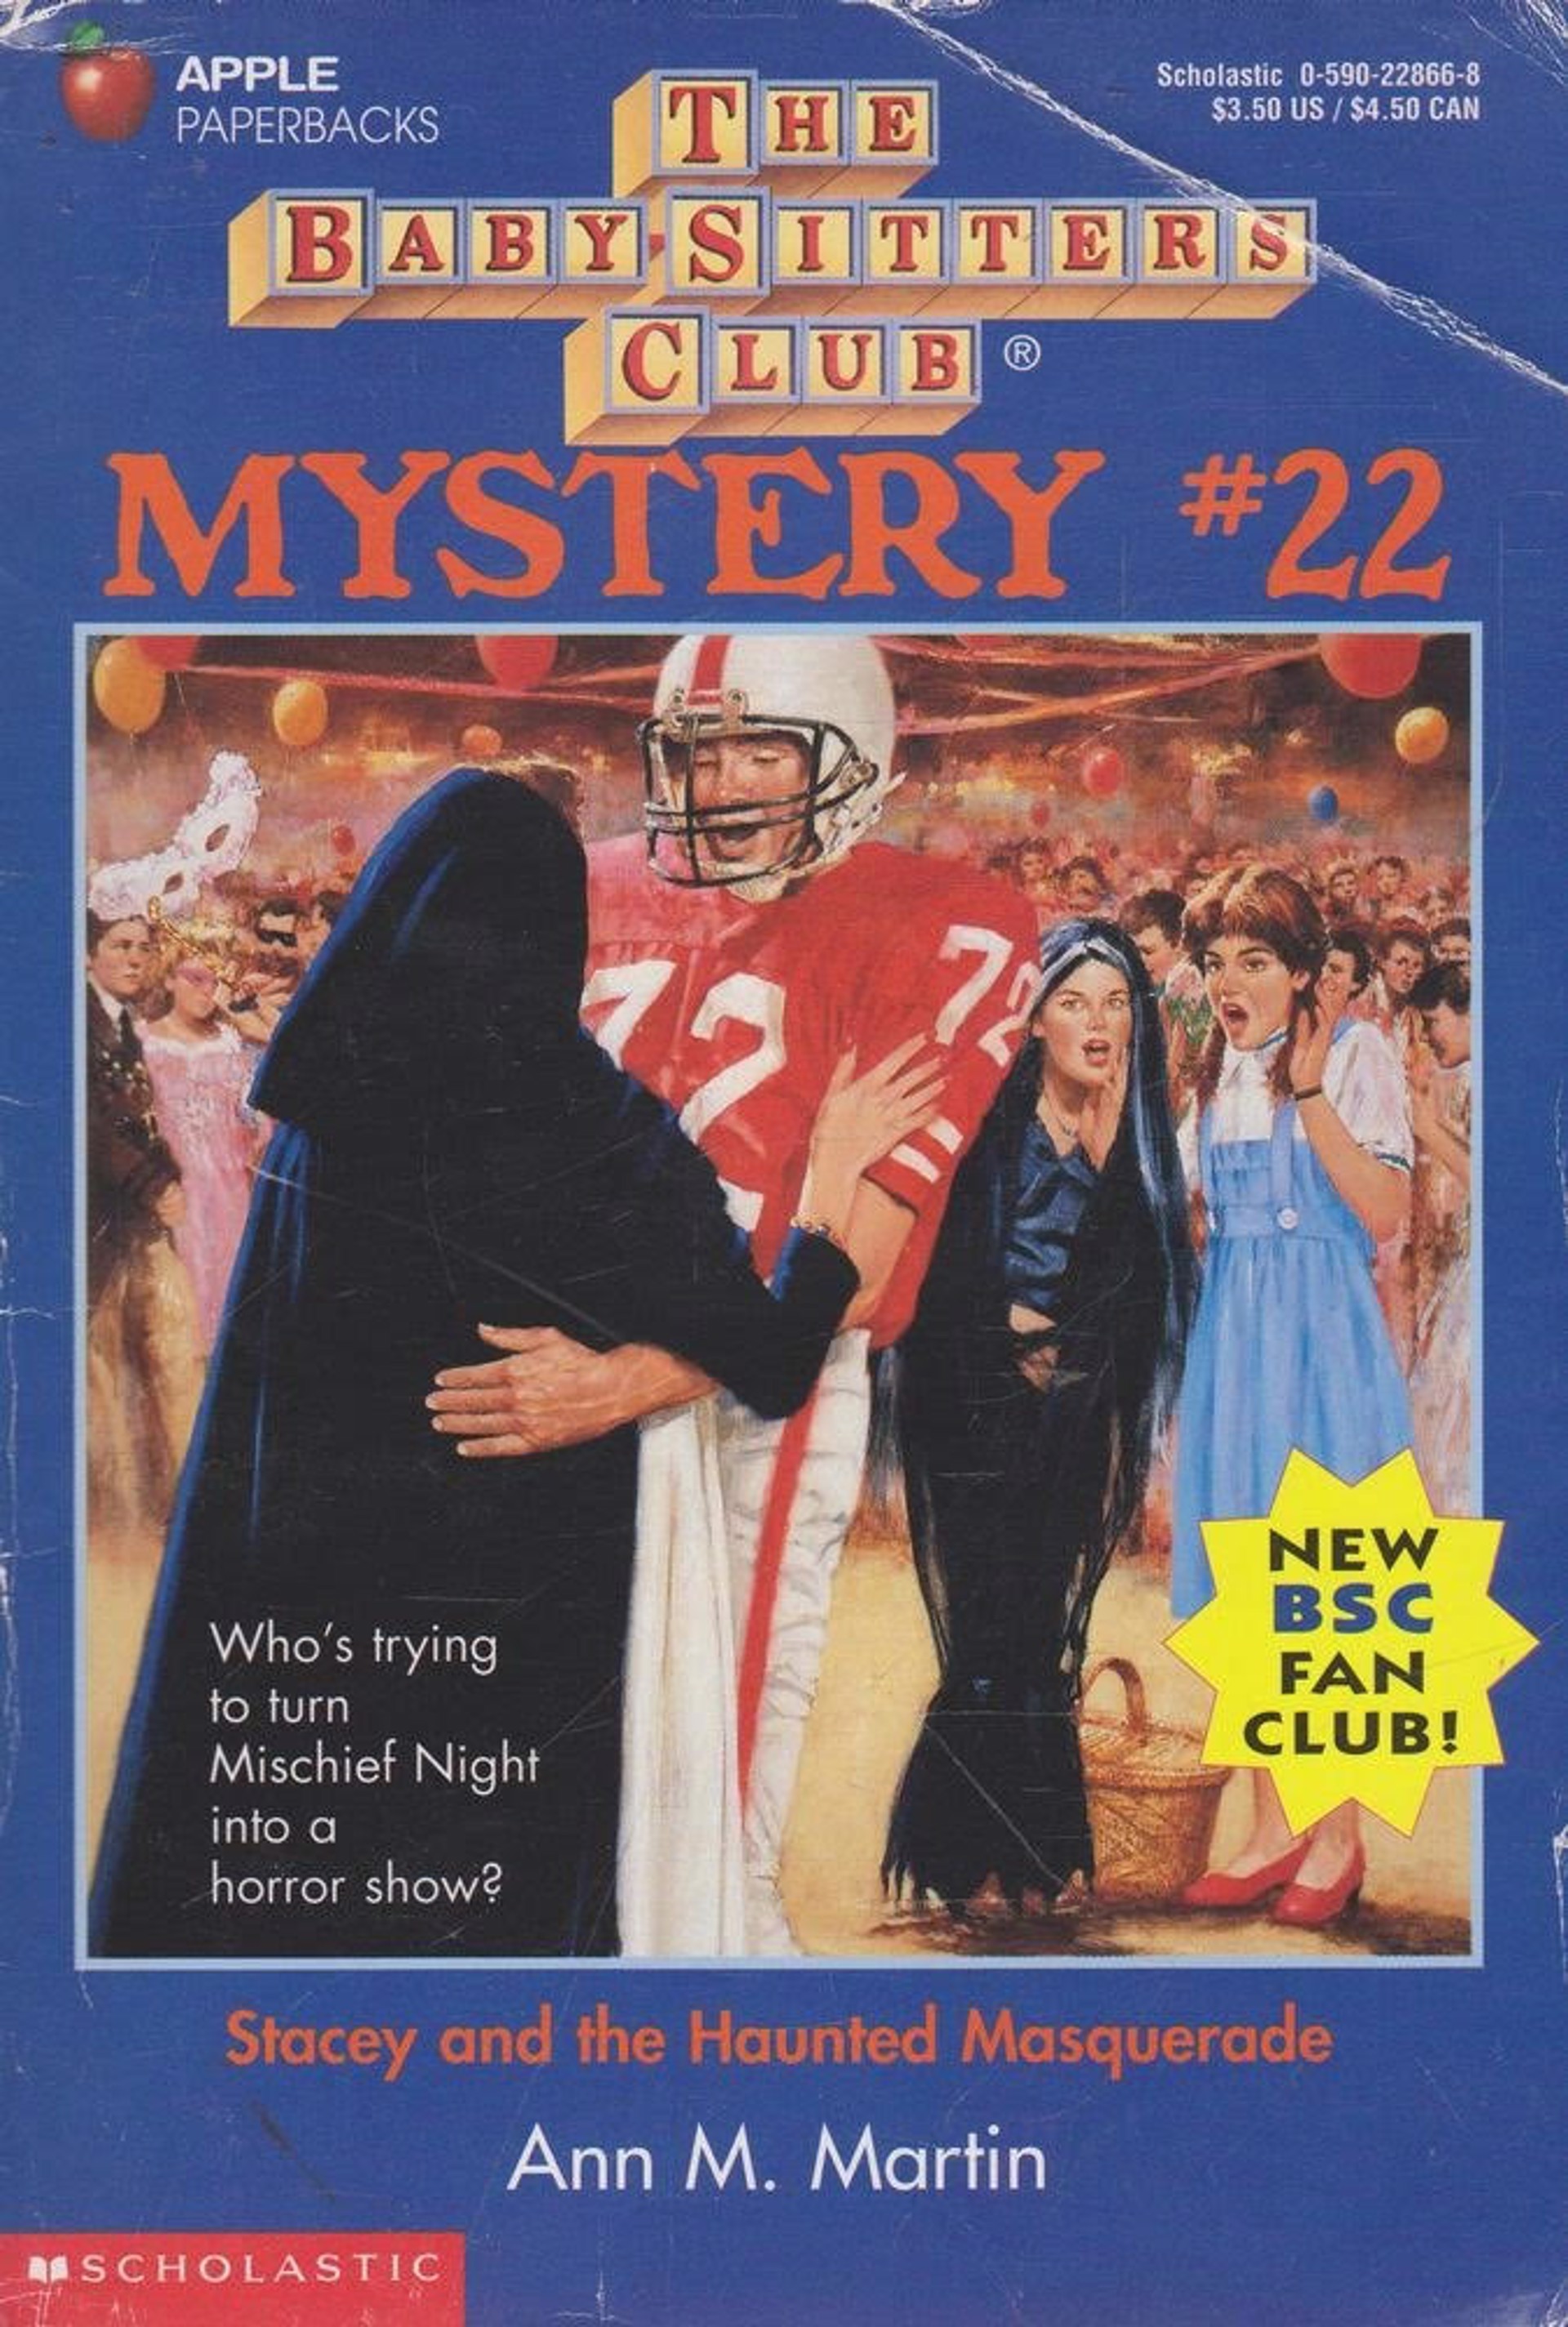 The Babysitter's Club Mystery #22 "Stacey and the Haunted Masquerade" by Hodges Soileau